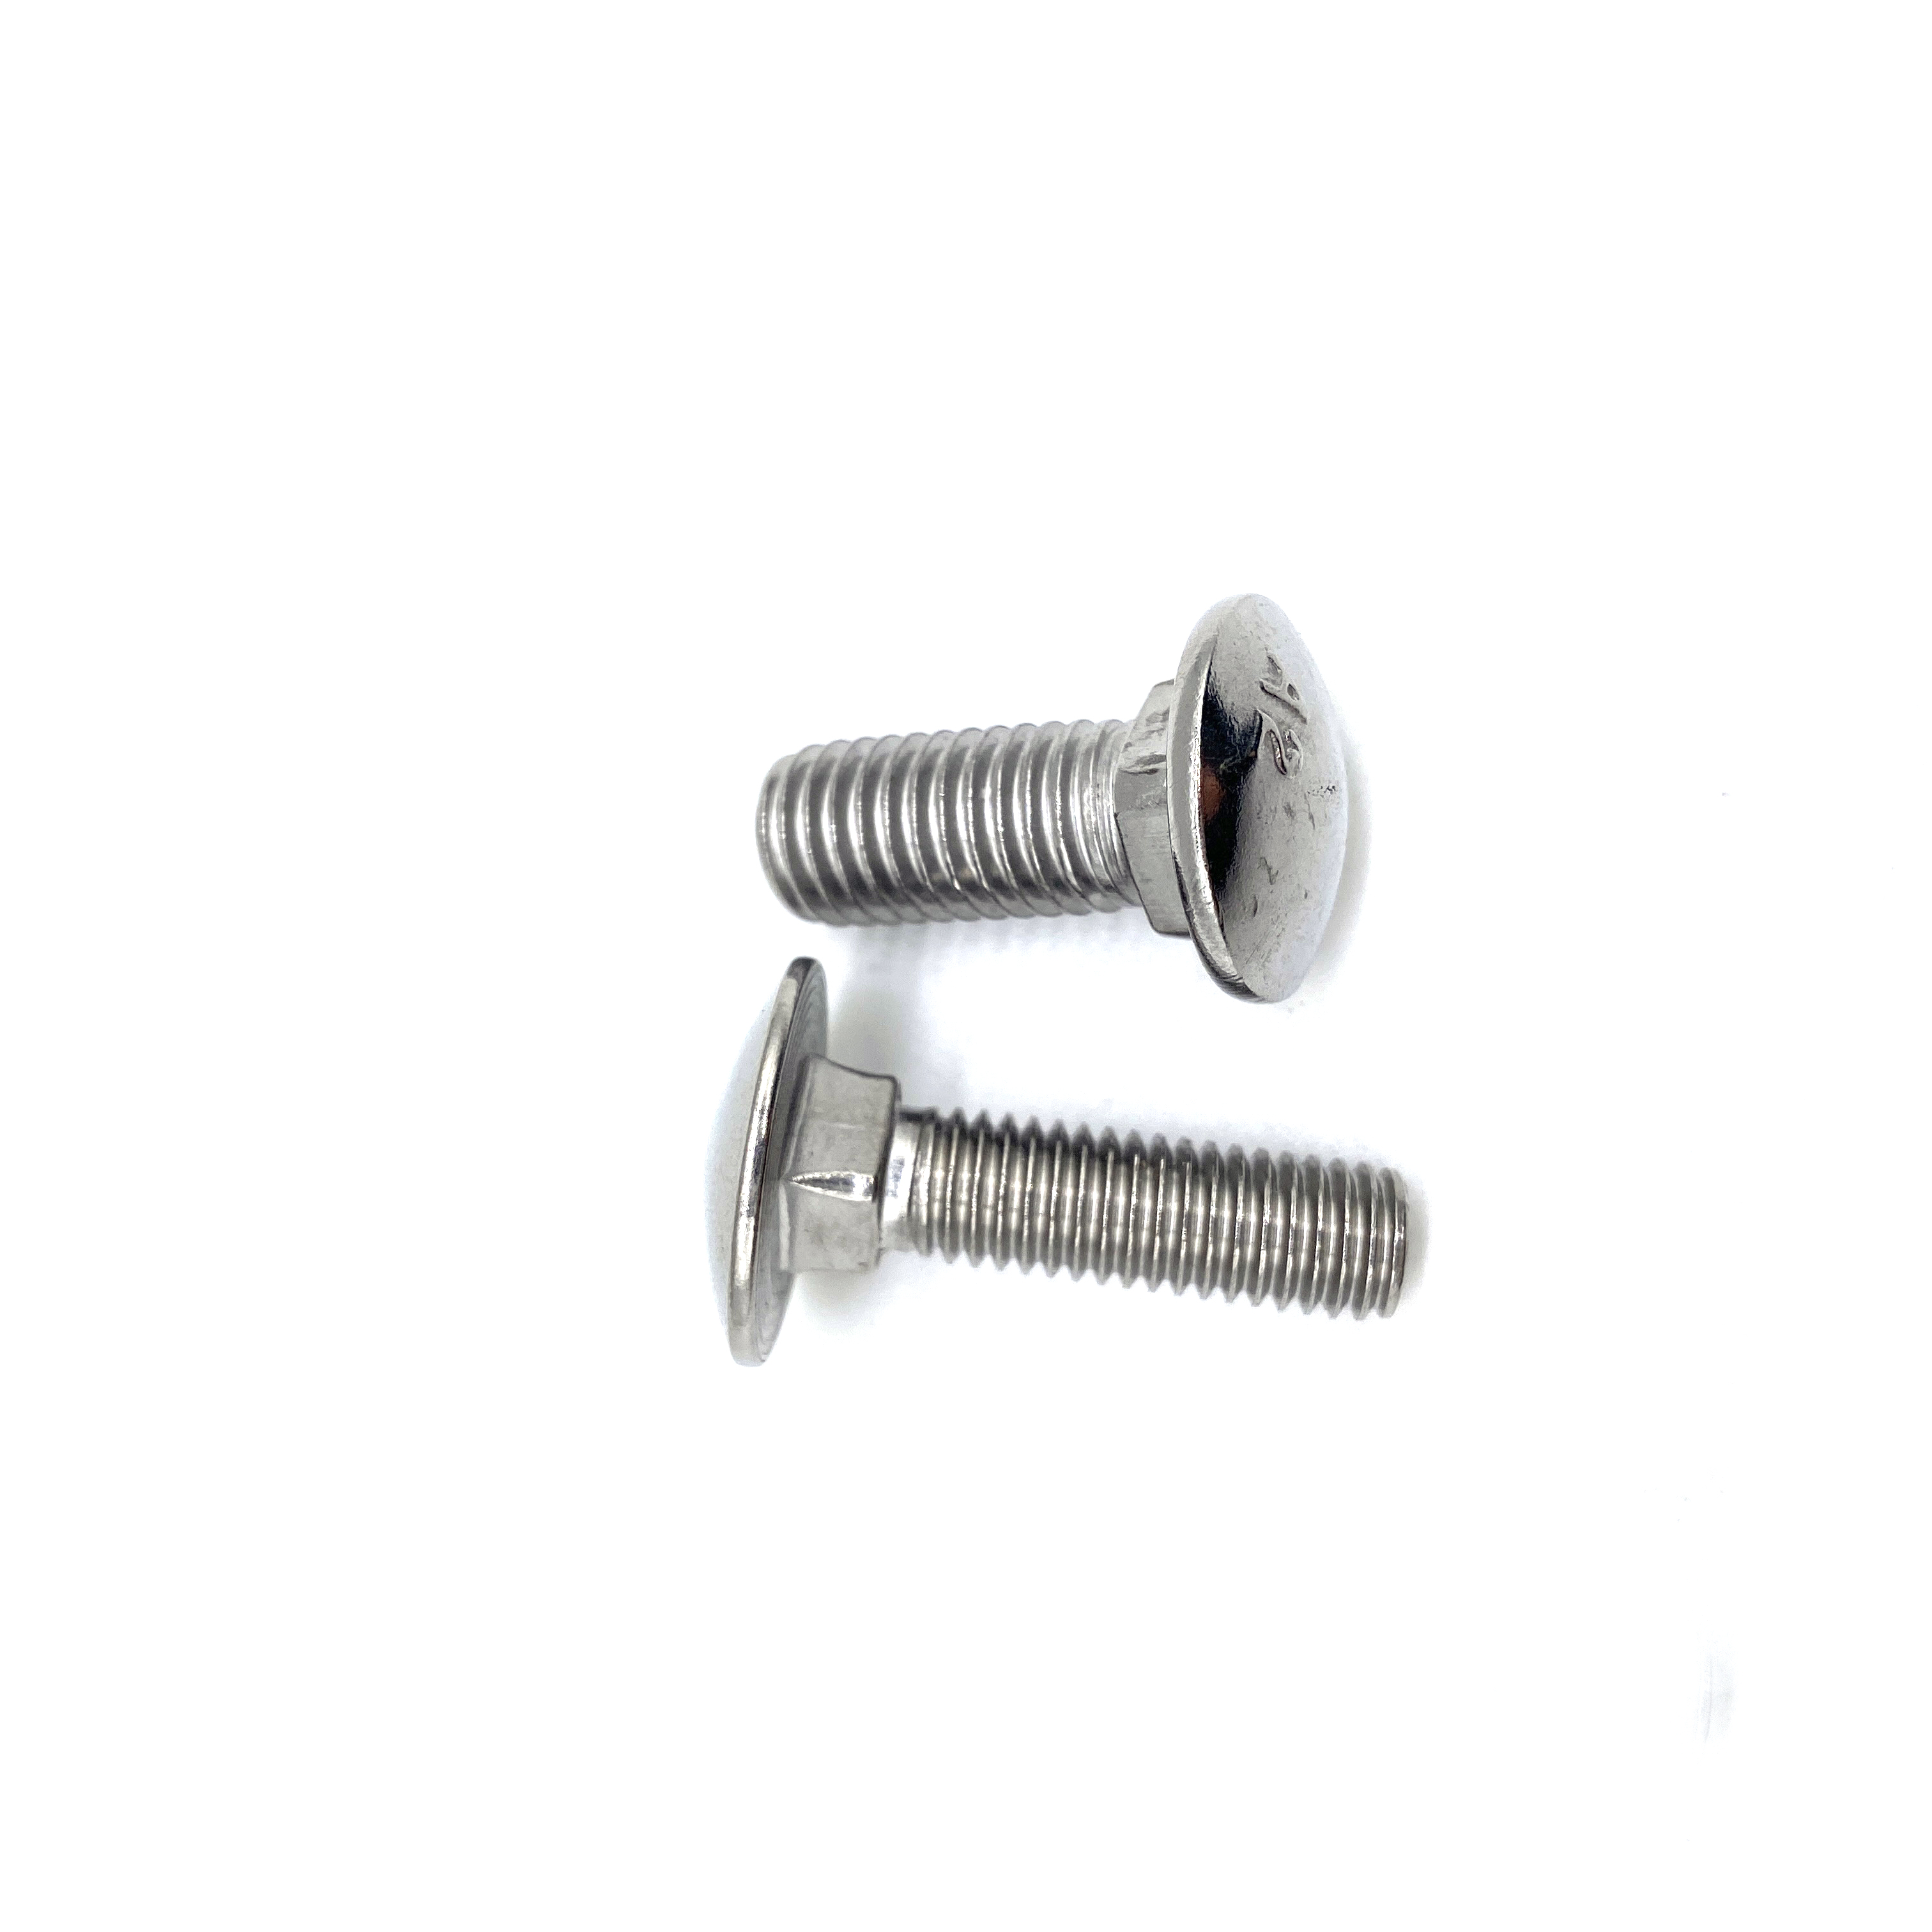 M6 M8 Coach Bolt Stainless Steel DIN603 A2 M10 Mushroom Head Square Neck Carriage Bolt